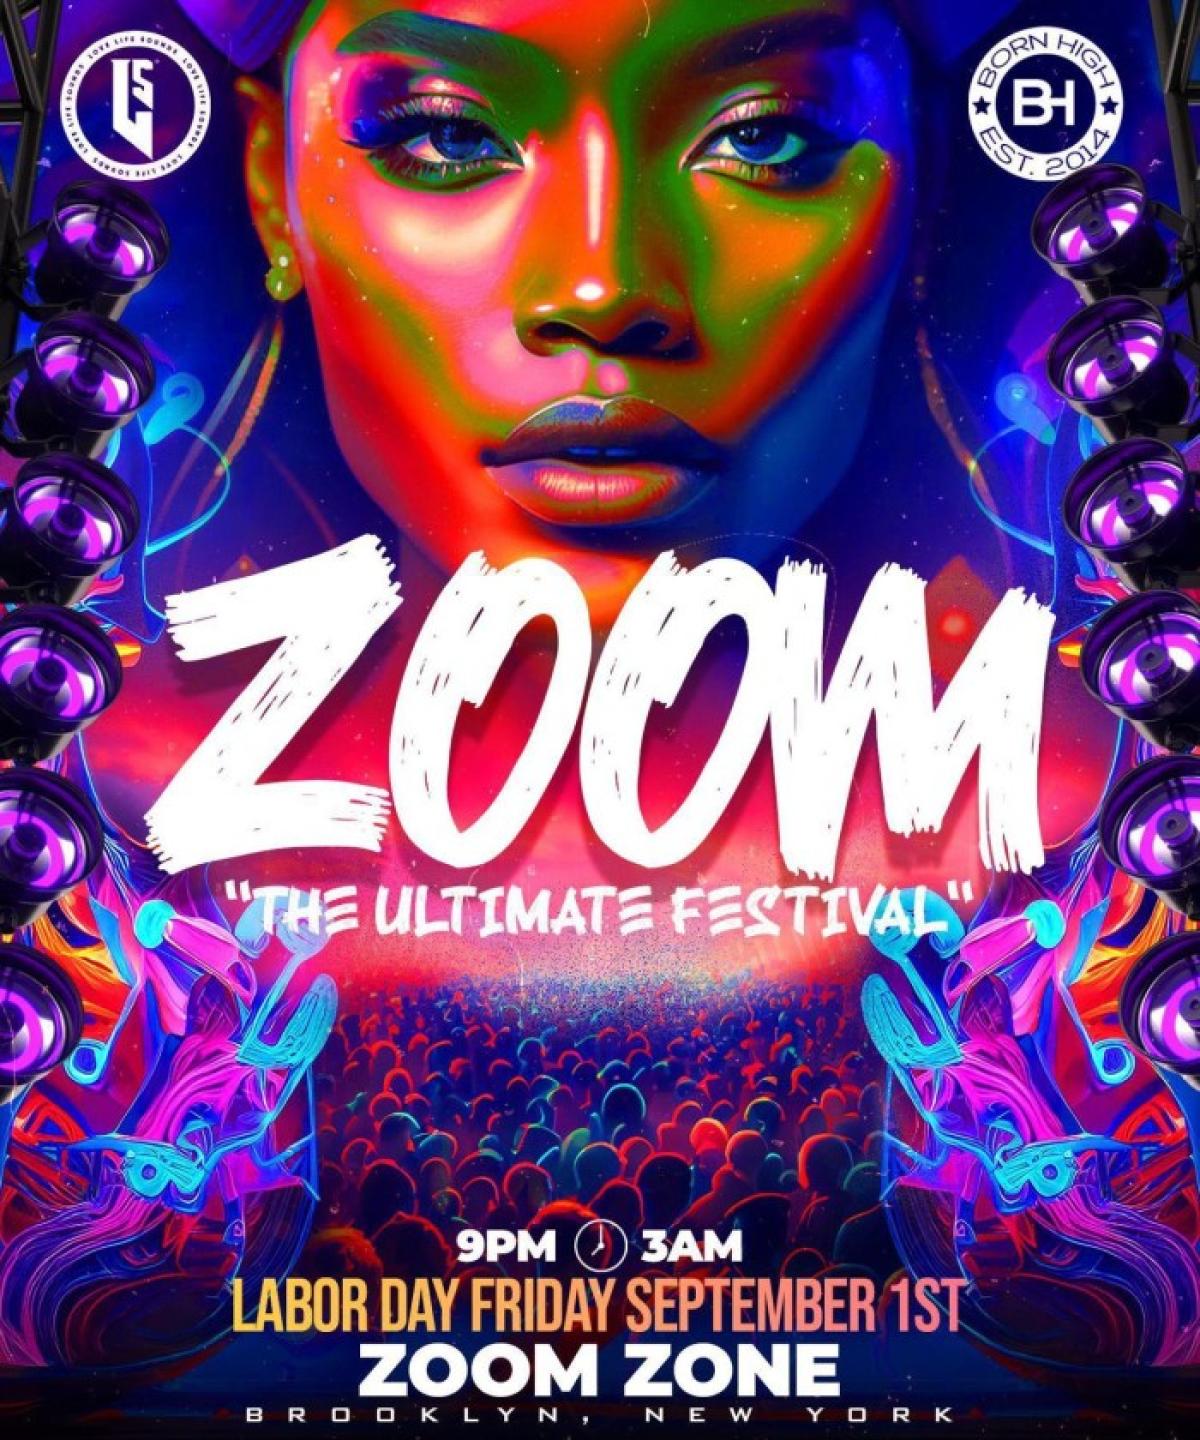 Zoom "The Ultimate Festival" flyer or graphic.